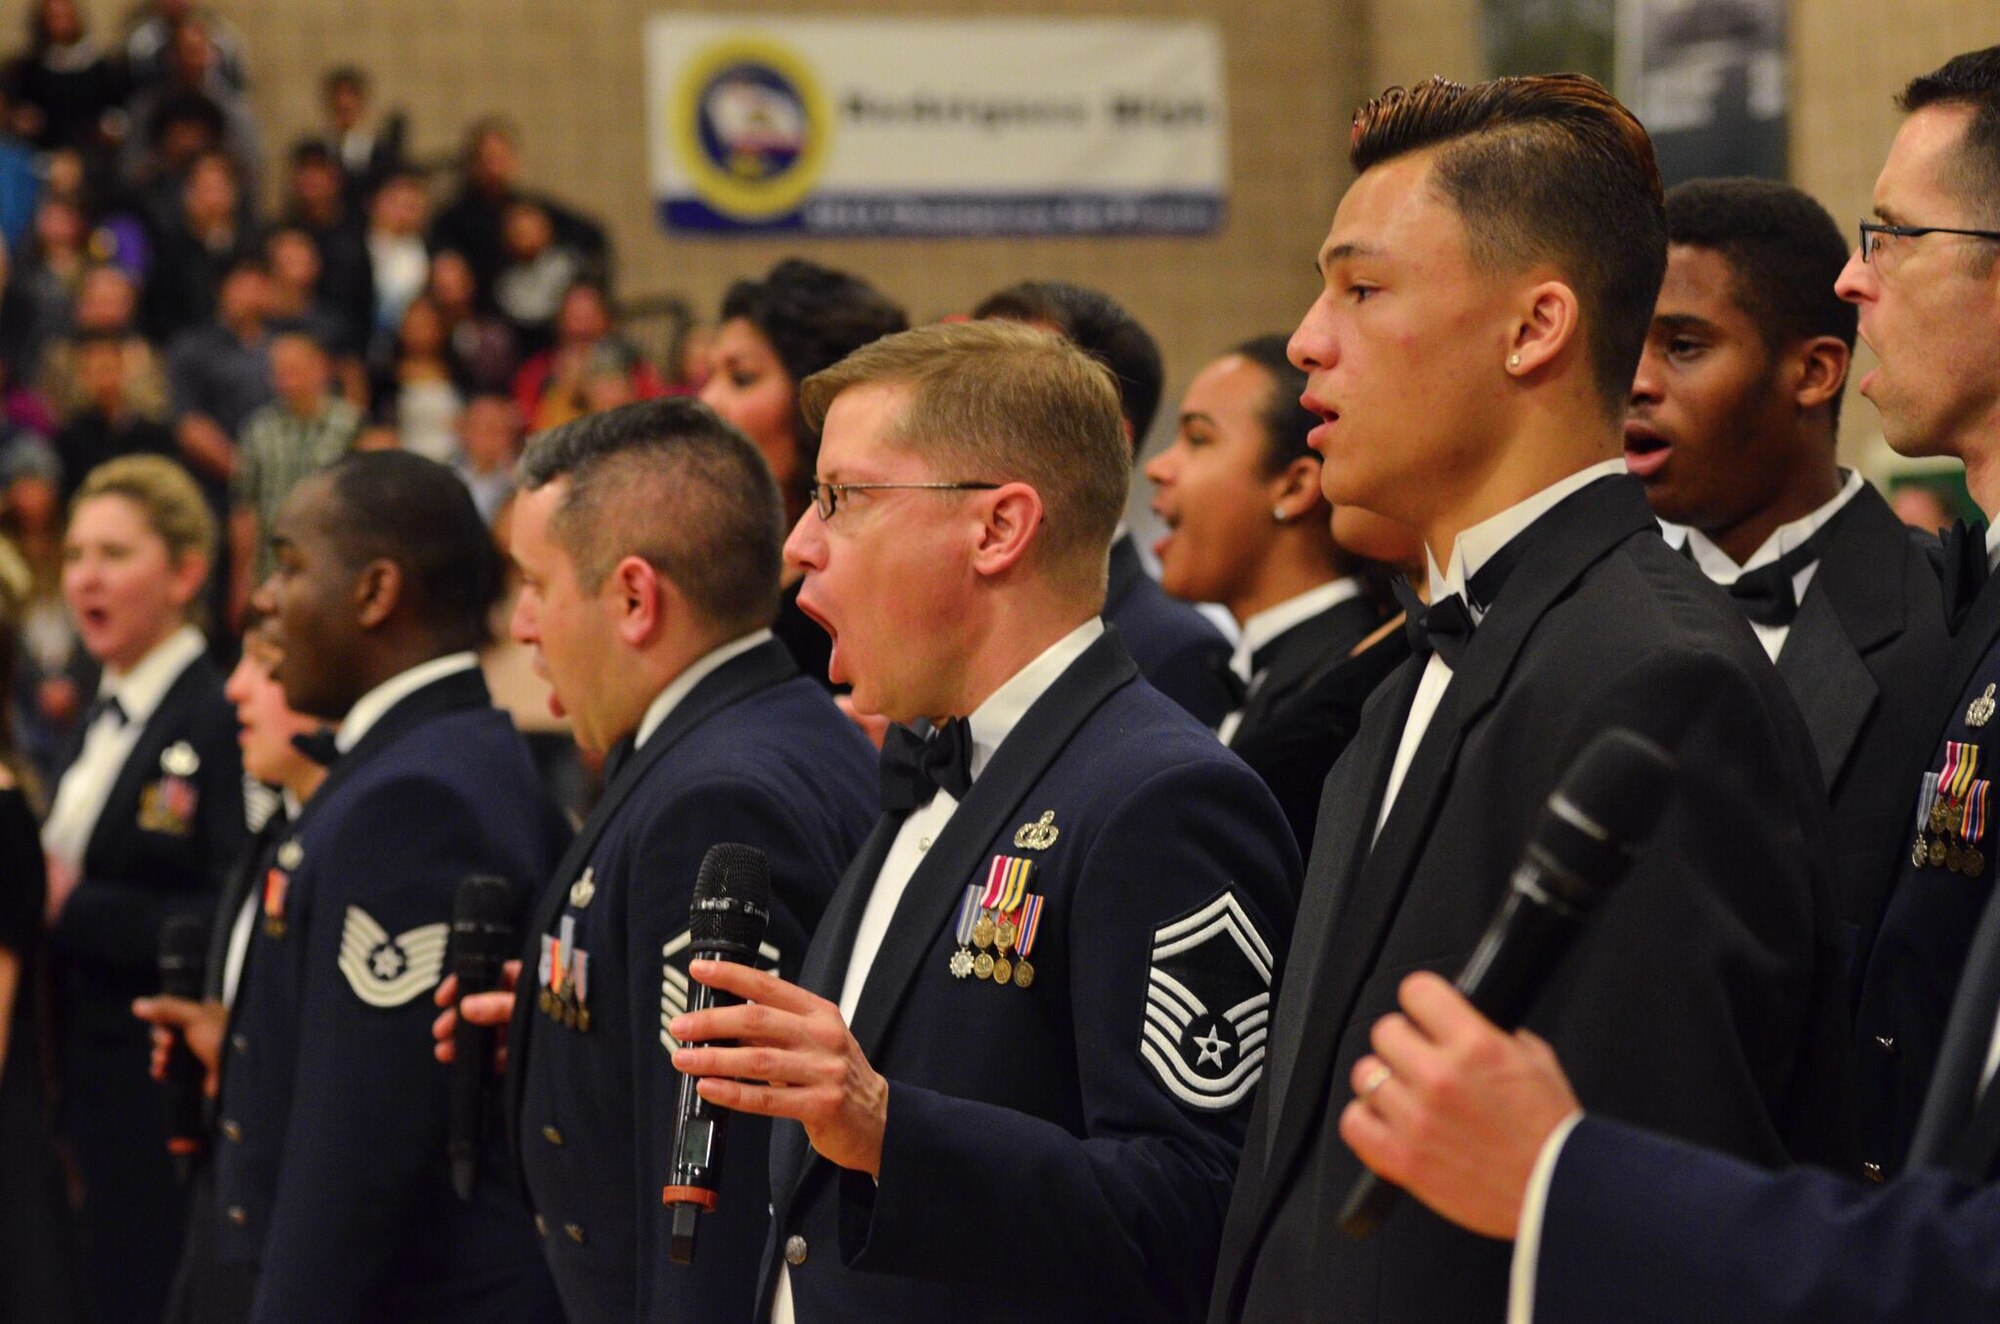 Members of the Singing Sergeants sing with high school students during a
performance in Fairfield, Calif. during the spring 2015 tour. (Air Force
photo by Senior Master Sgt. Bob Kamholz/released)
